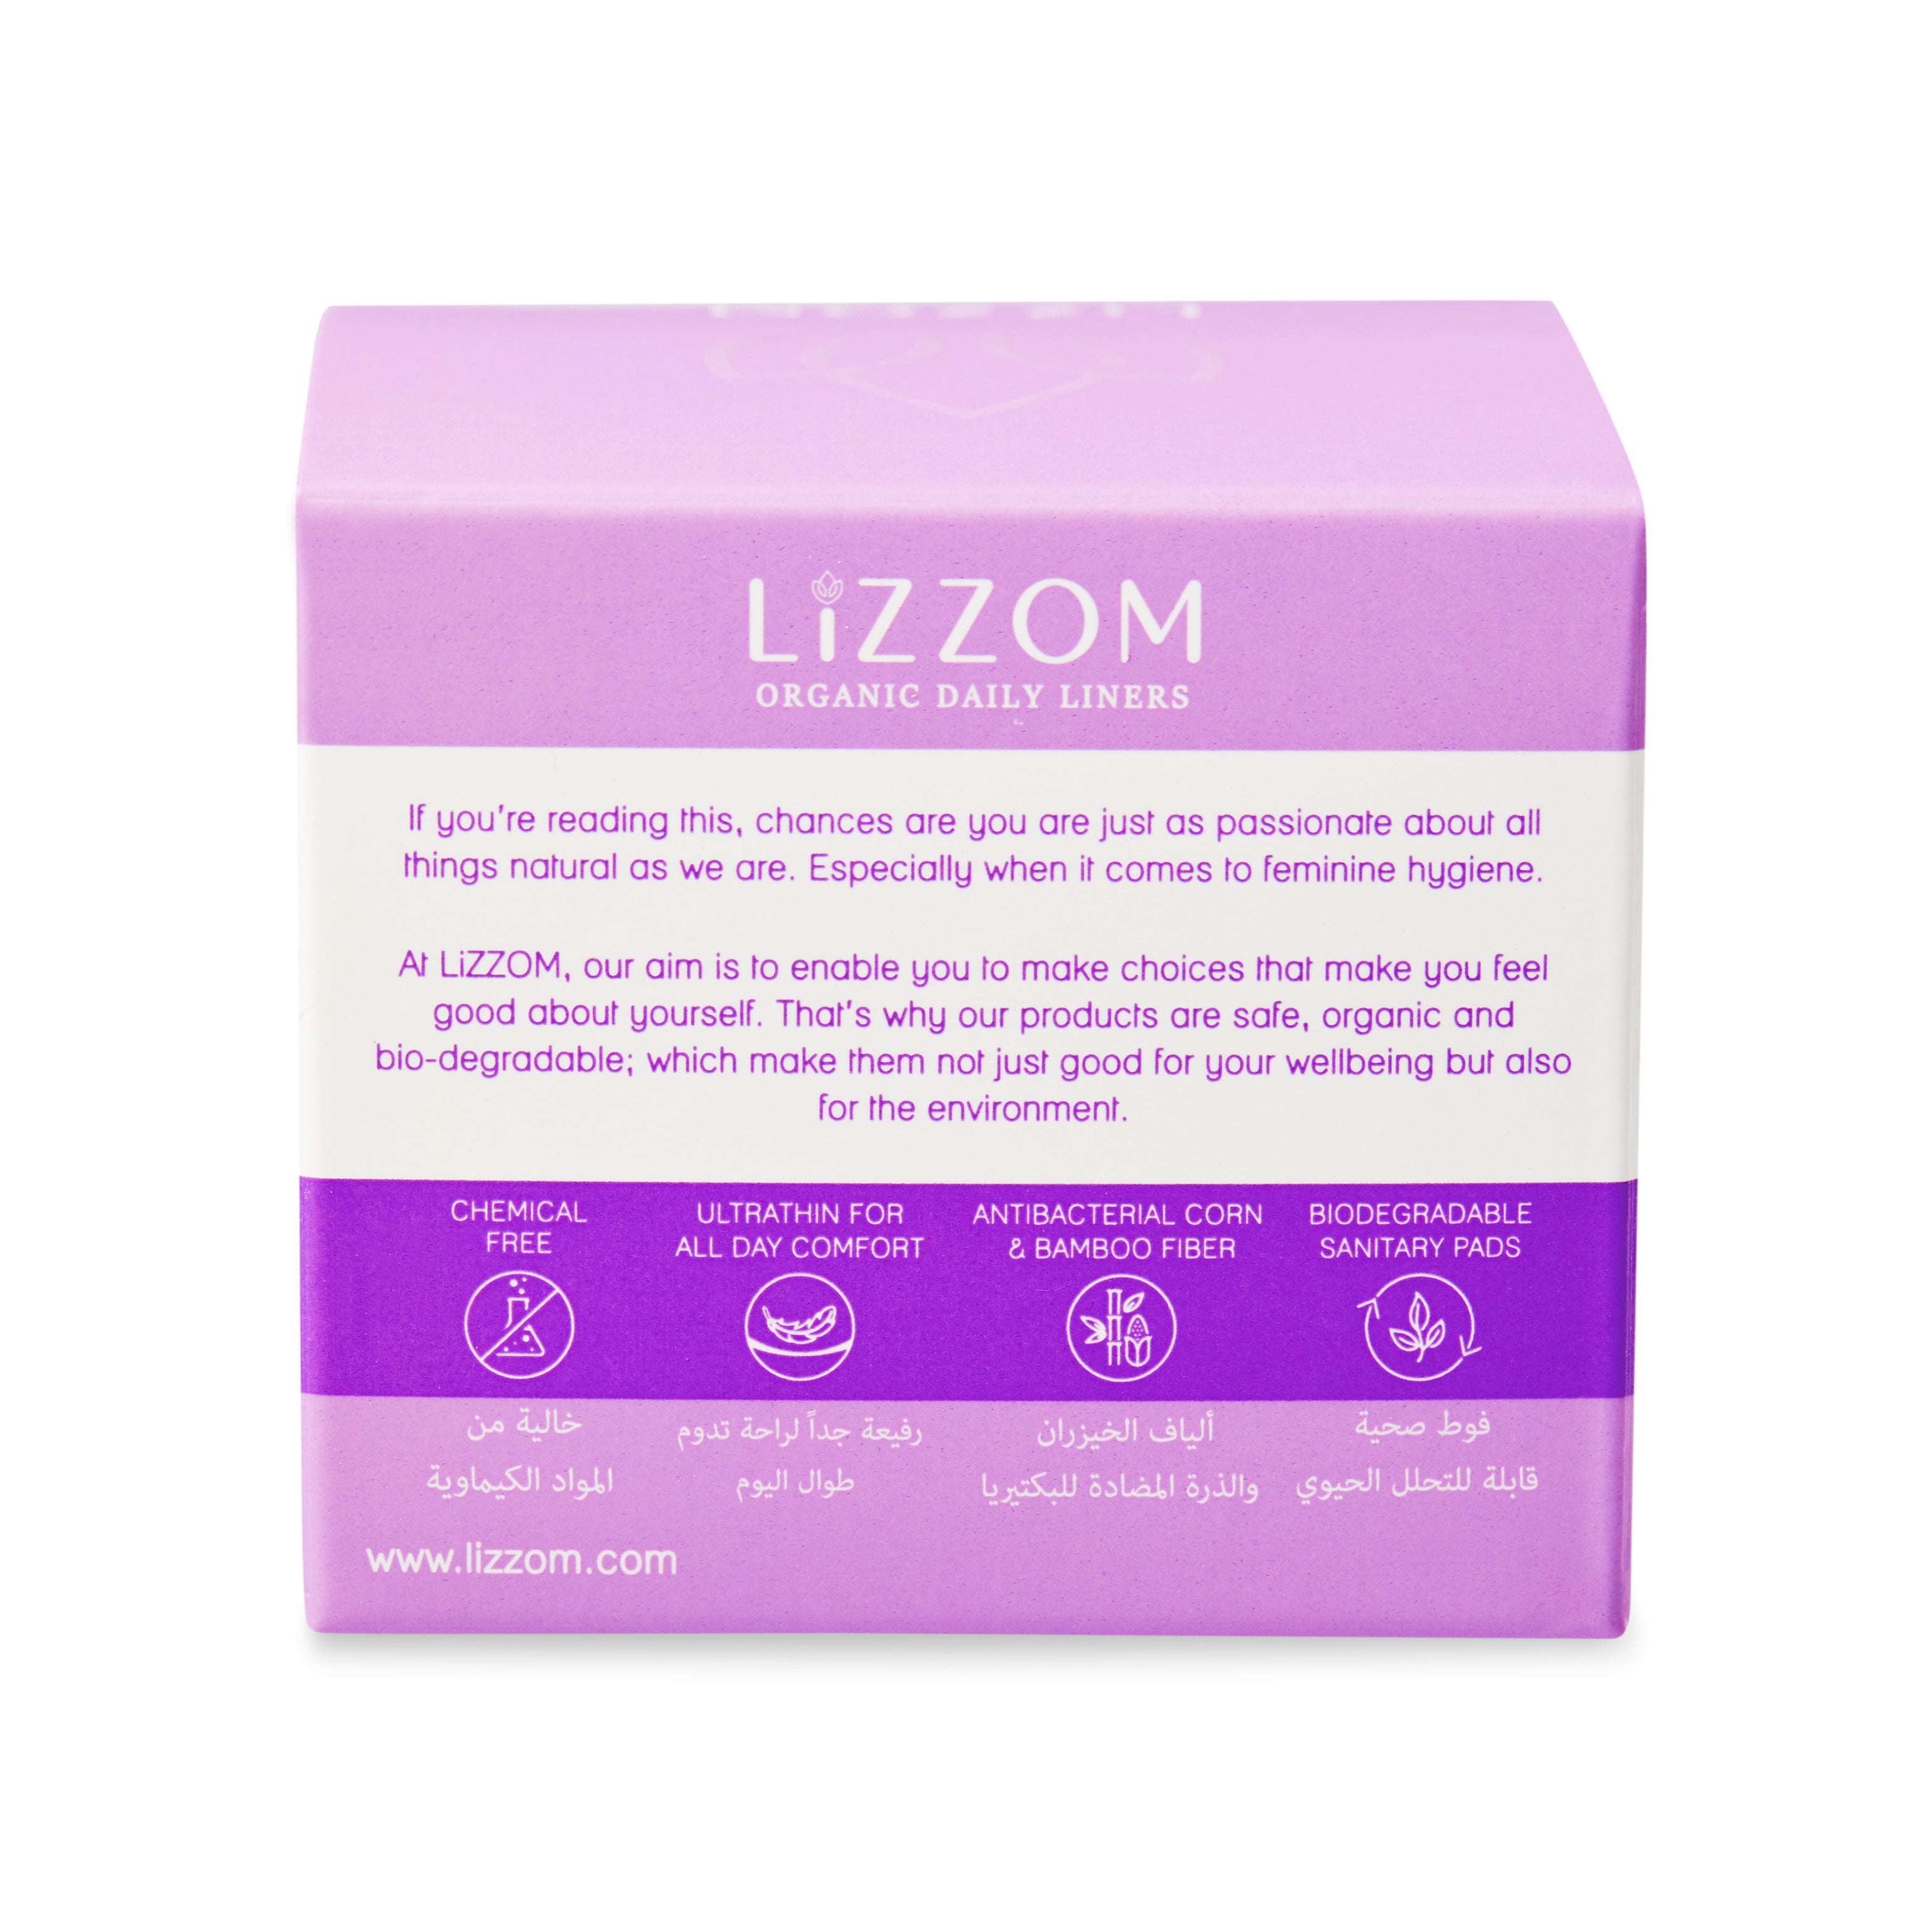 LiZZOM Organic Ultrathin  Liners for daily use   (20 Daily Liners)